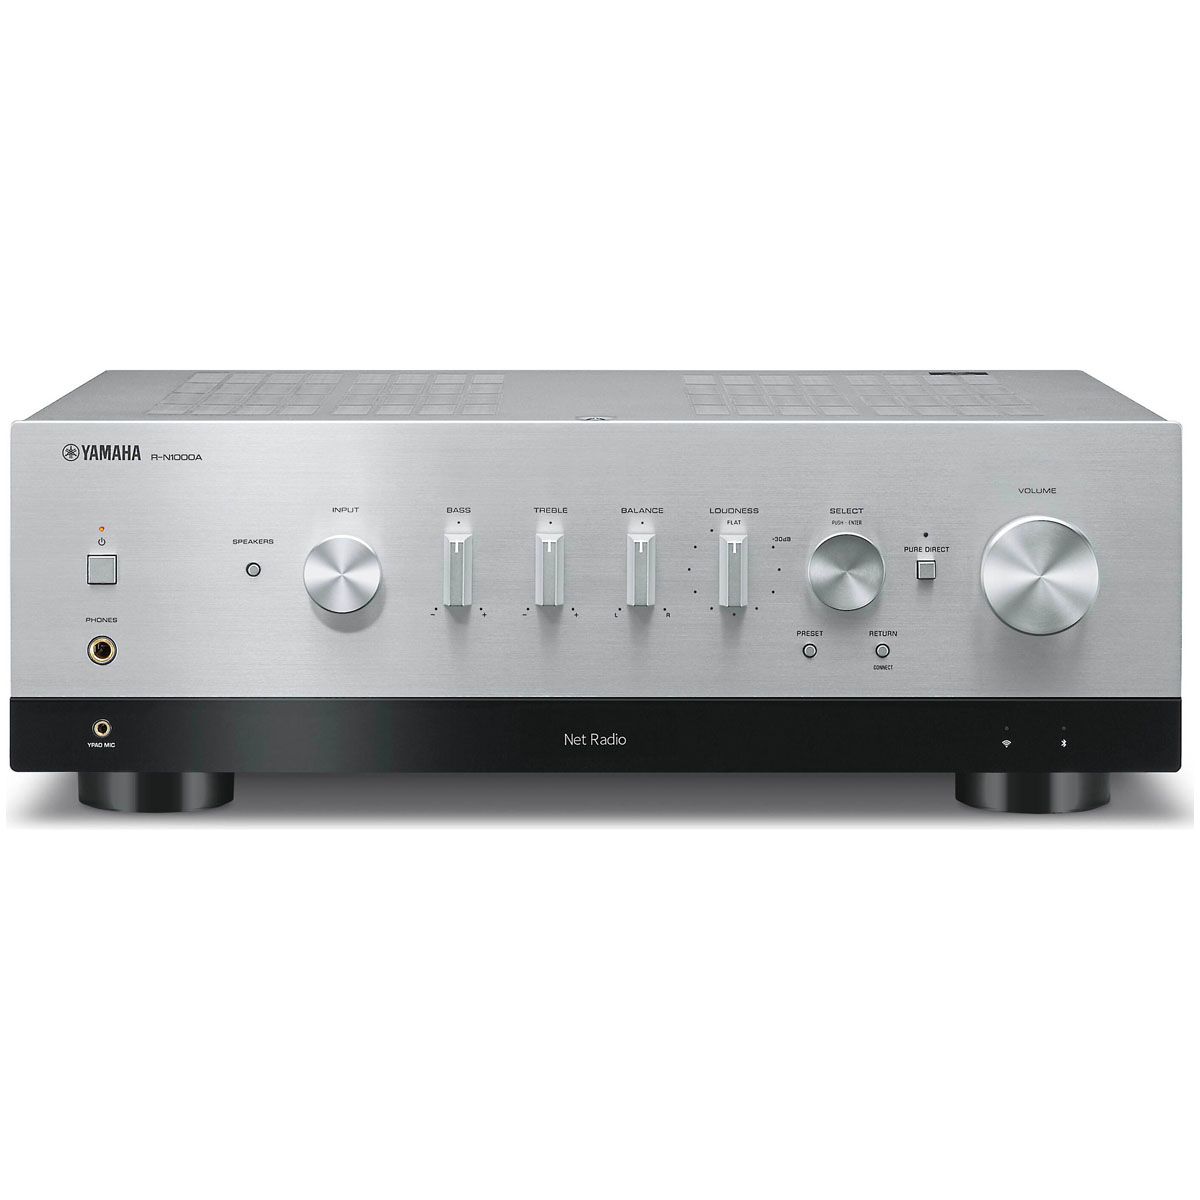 Yamaha R-N1000A Network Stereo Receiver silver front view